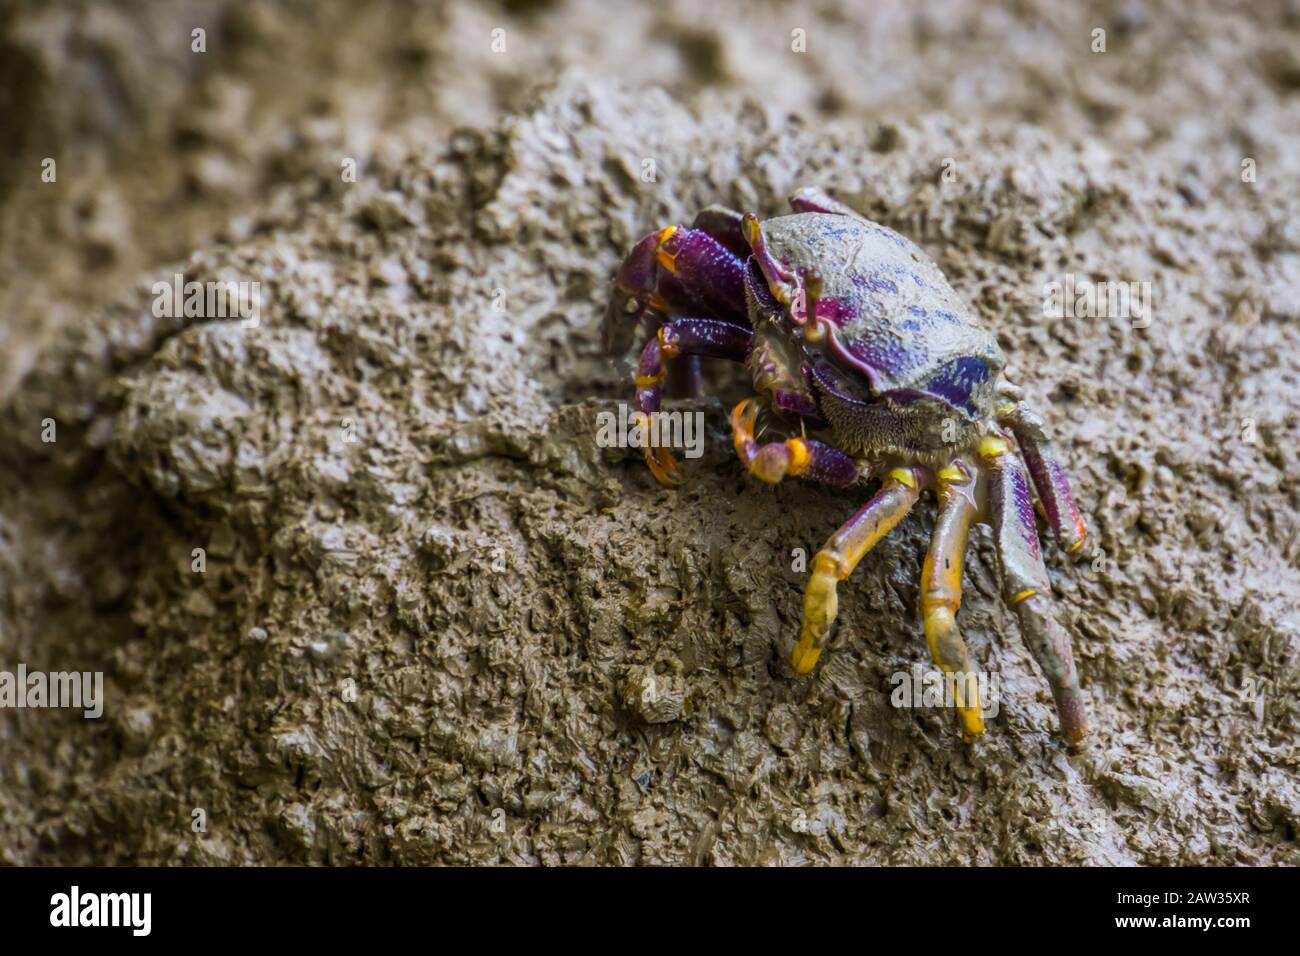 closeup of a female fiddler crab eating sand, tropical crustacean specie  Stock Photo - Alamy